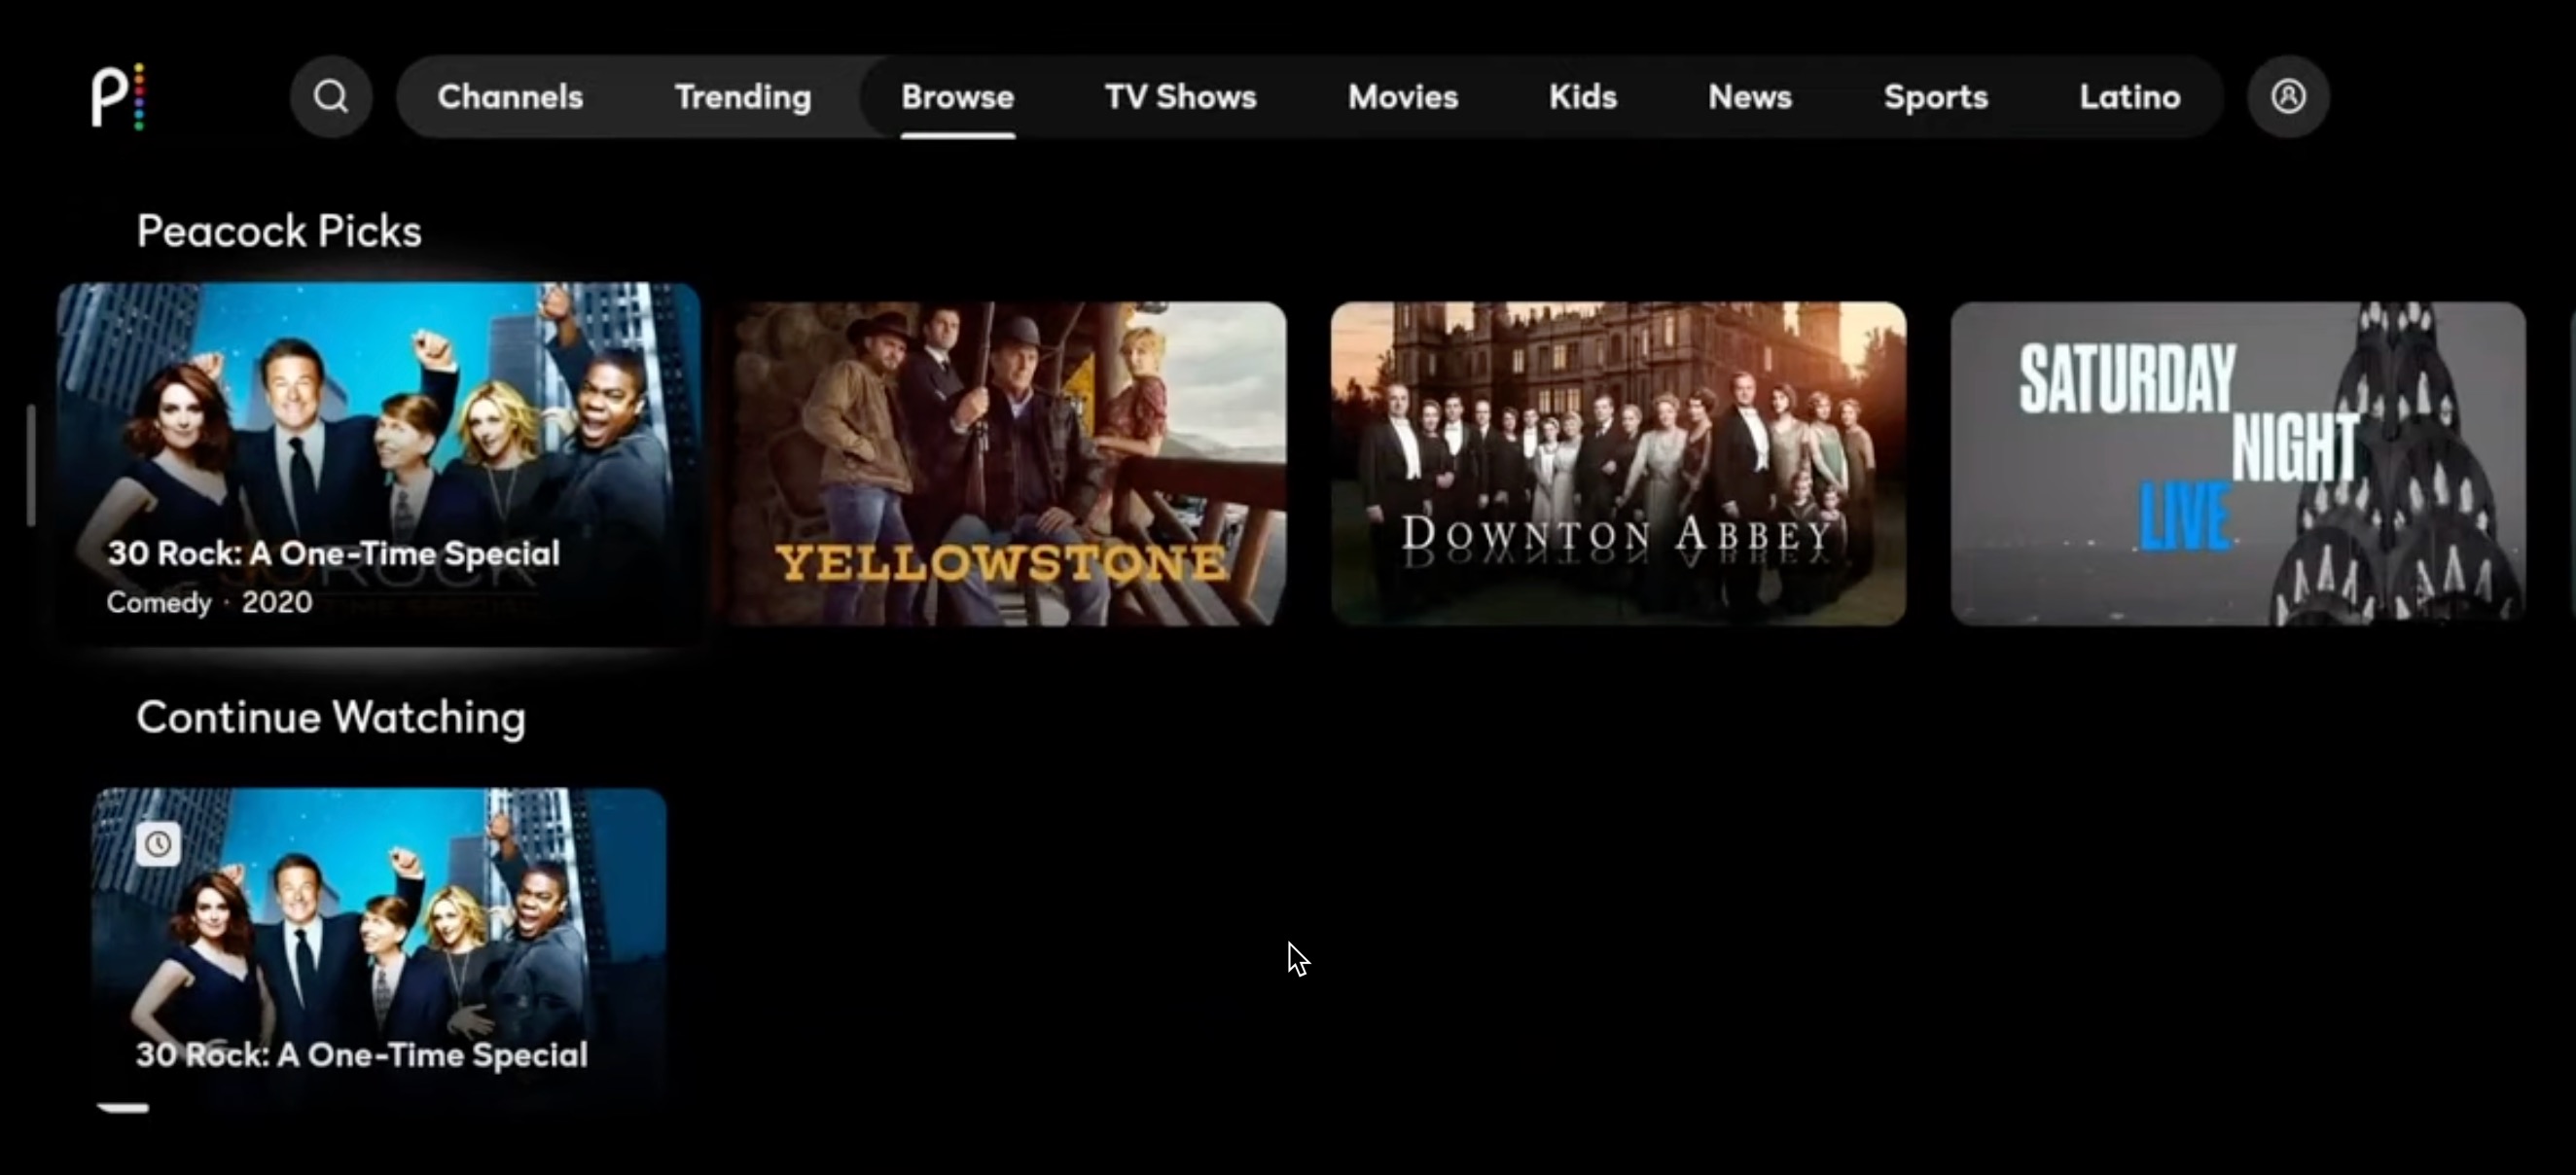 Launch your favorite movie on Peacock TV